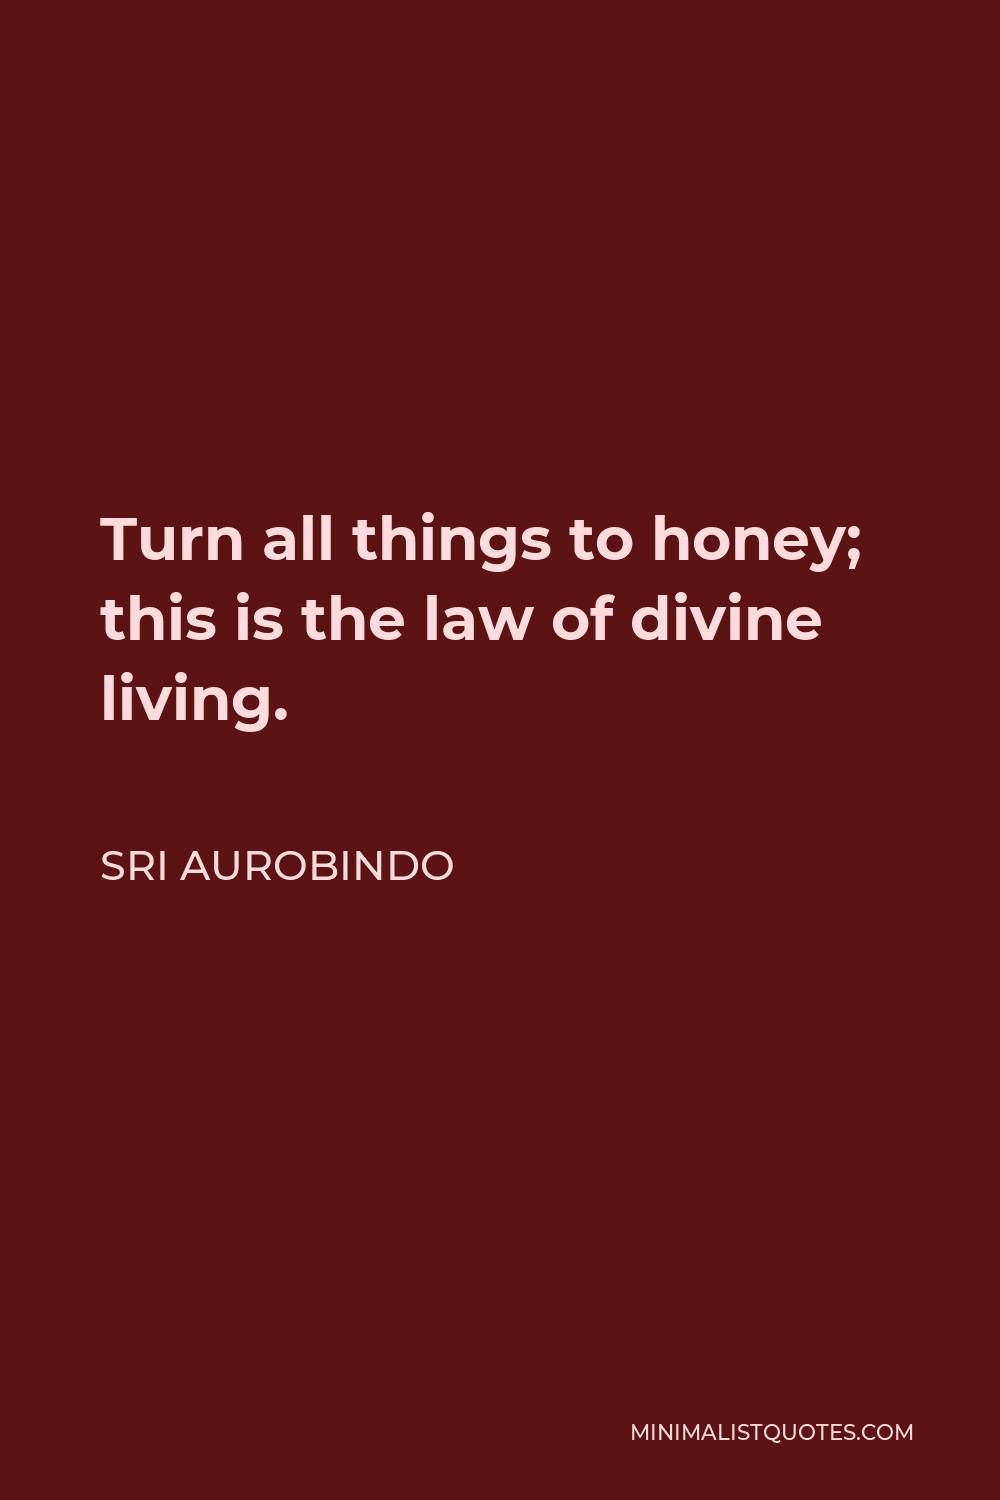 Sri Aurobindo Quote - Turn all things to honey; this is the law of divine living.